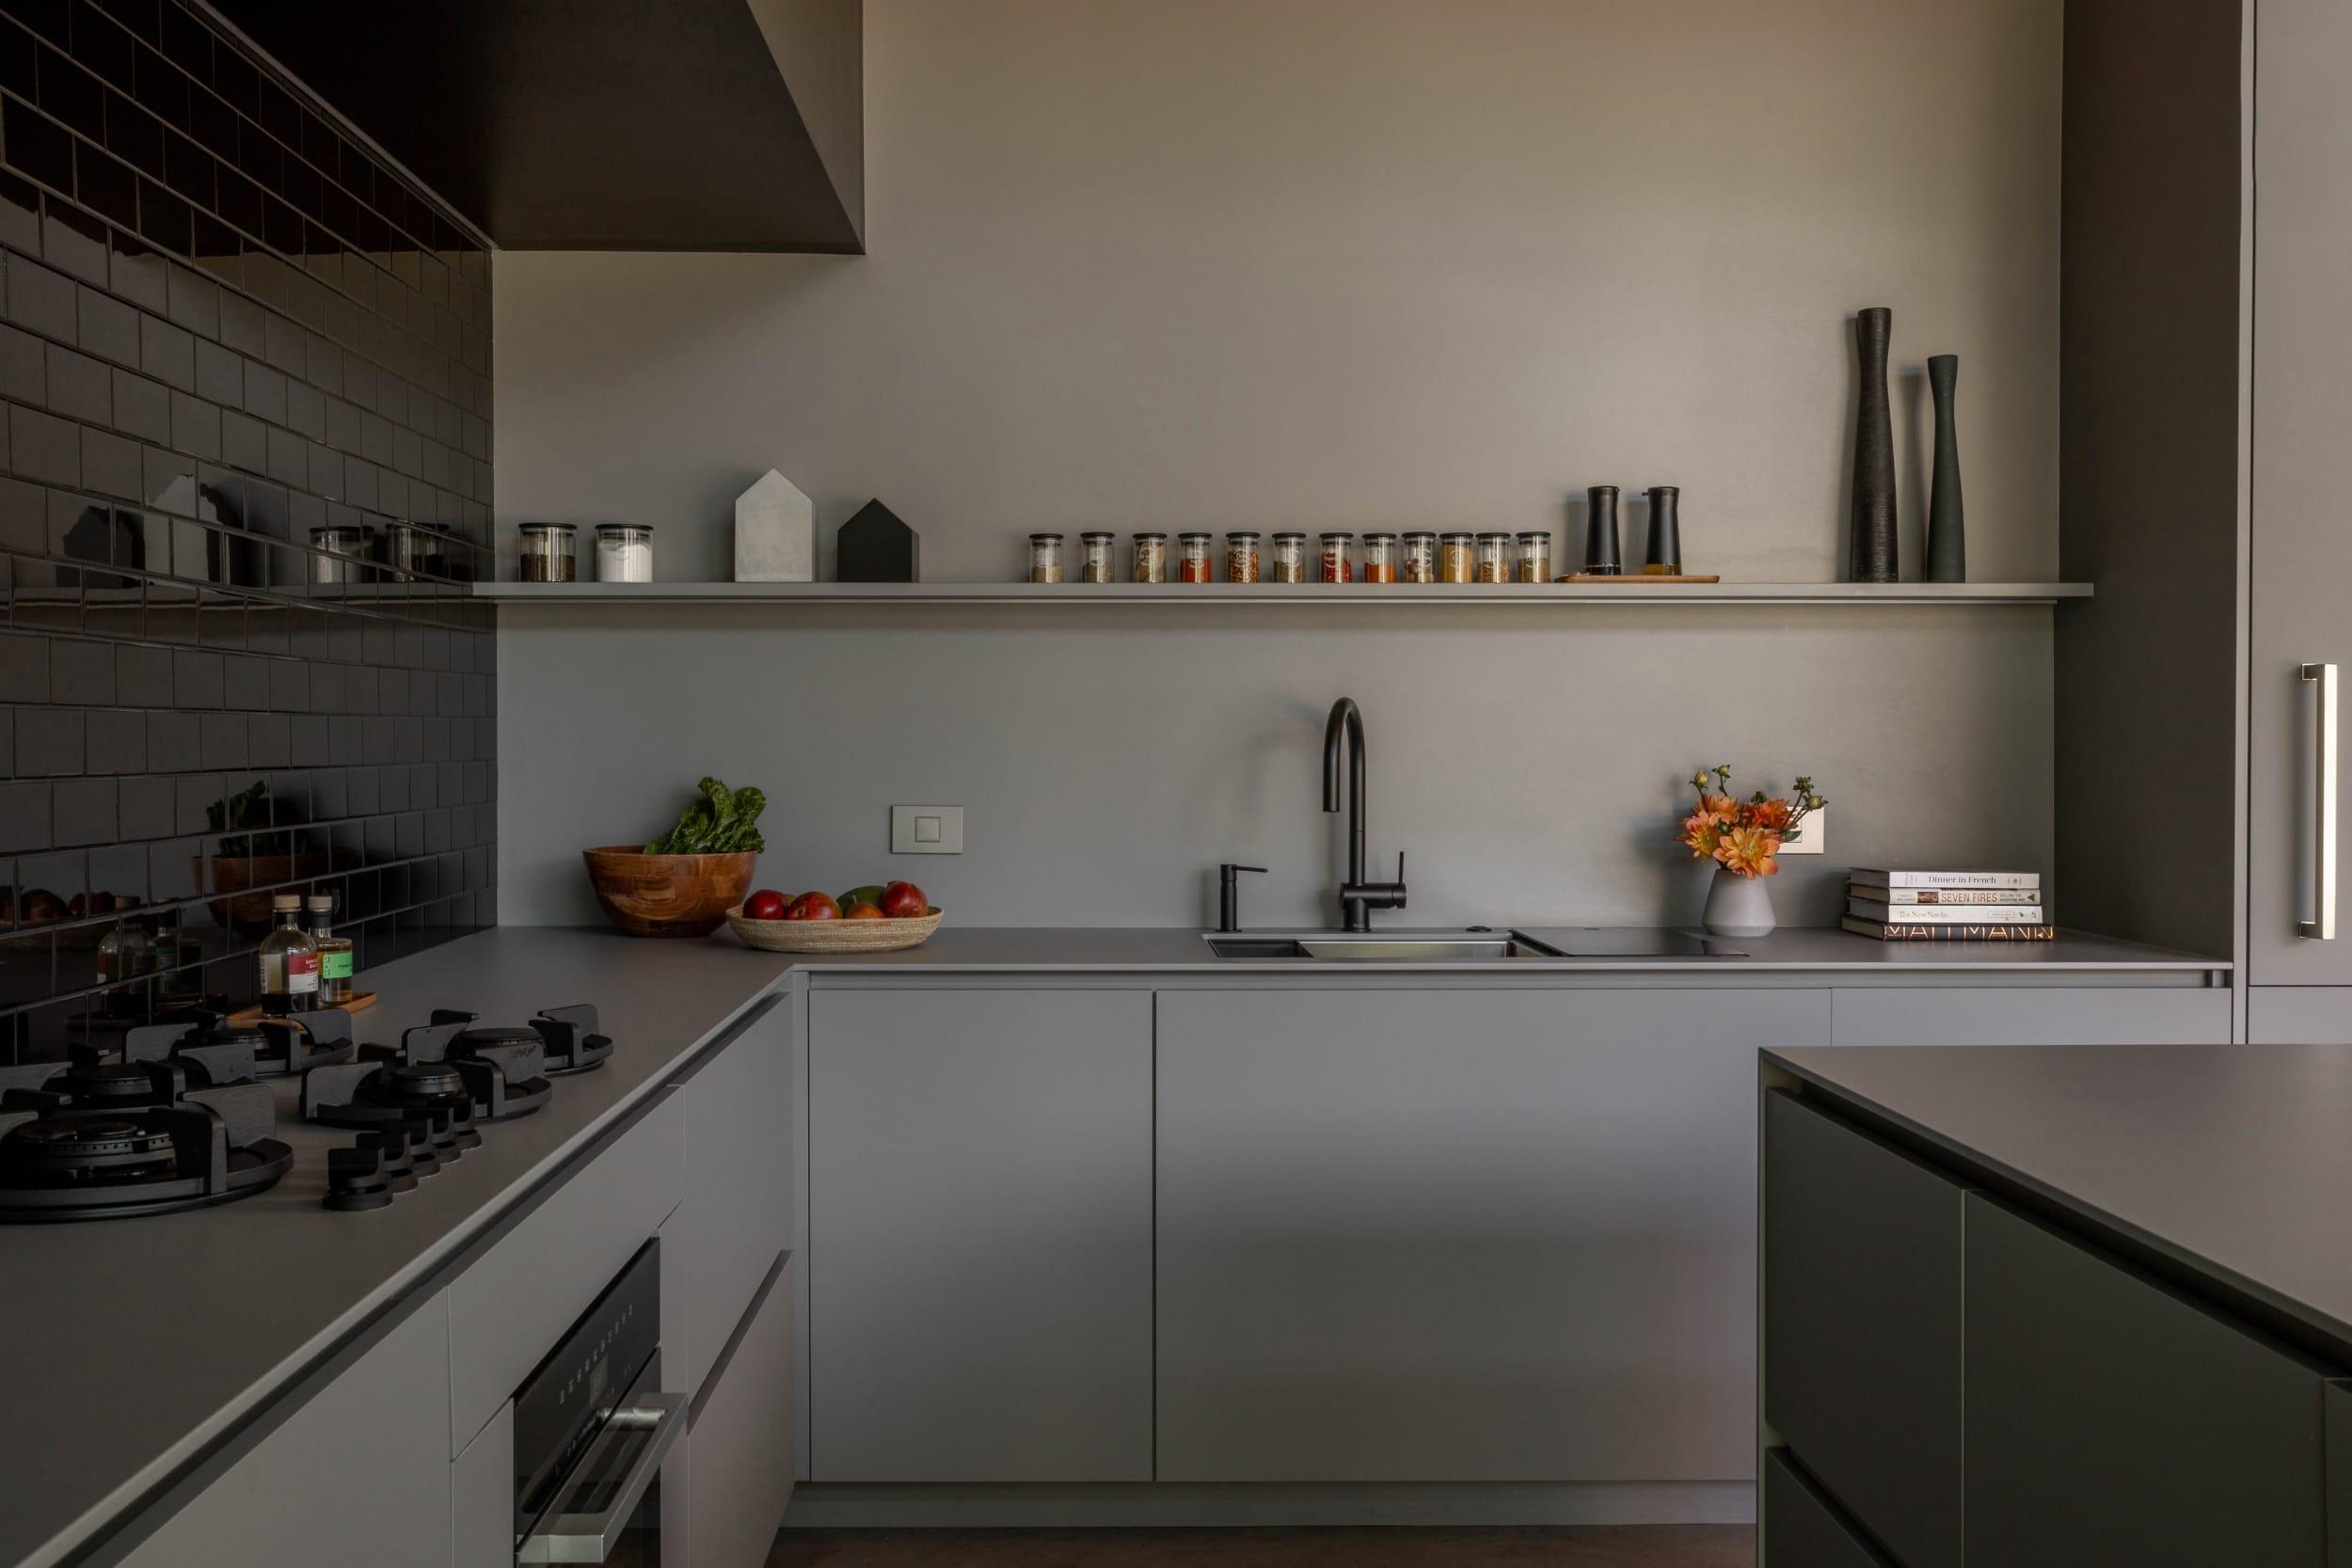 A modern kitchen with black and grey tiled walls in a modern home.